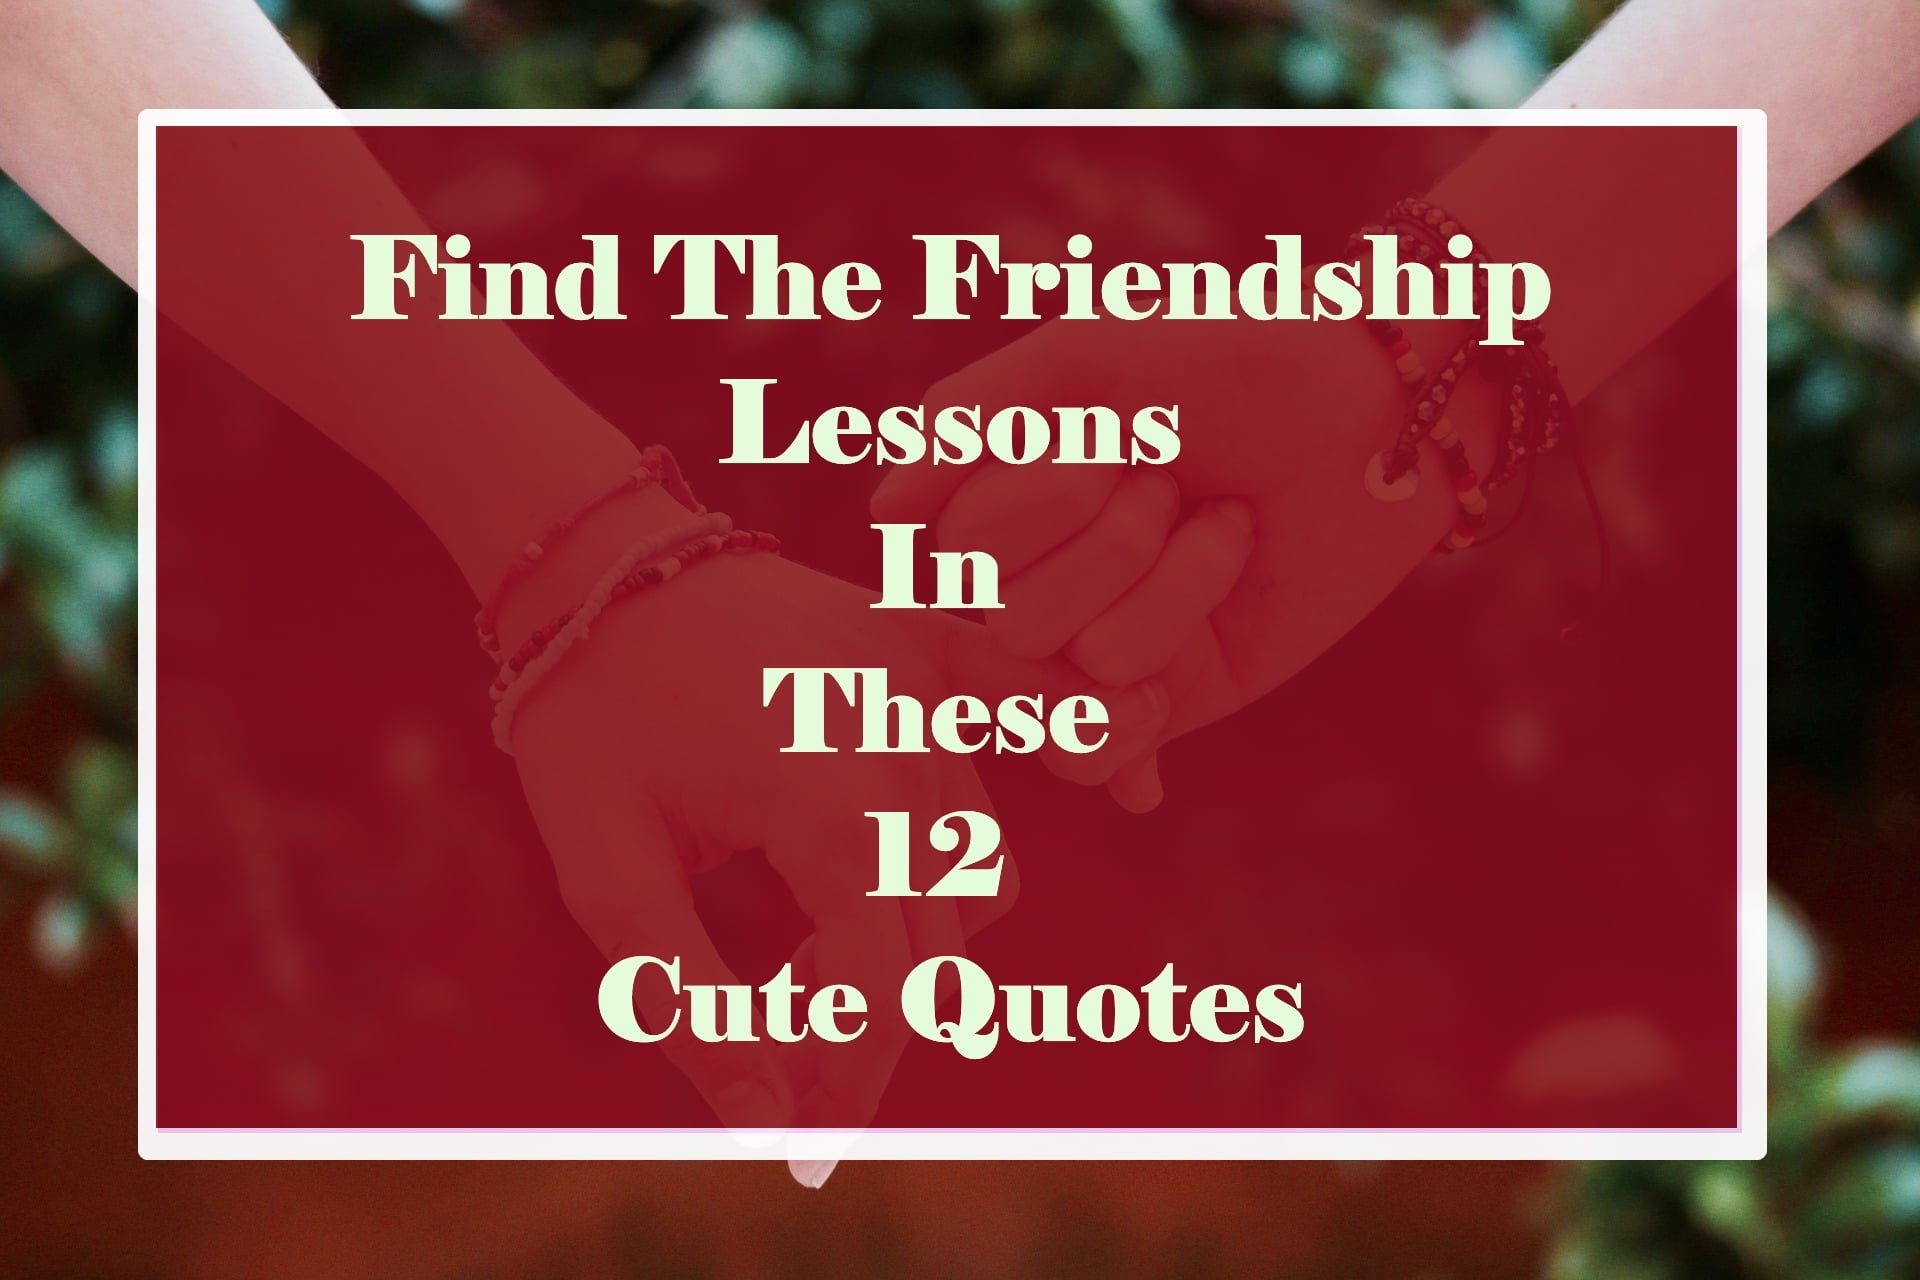 Find The Friendship Lessons In These 12 Cute Quotes